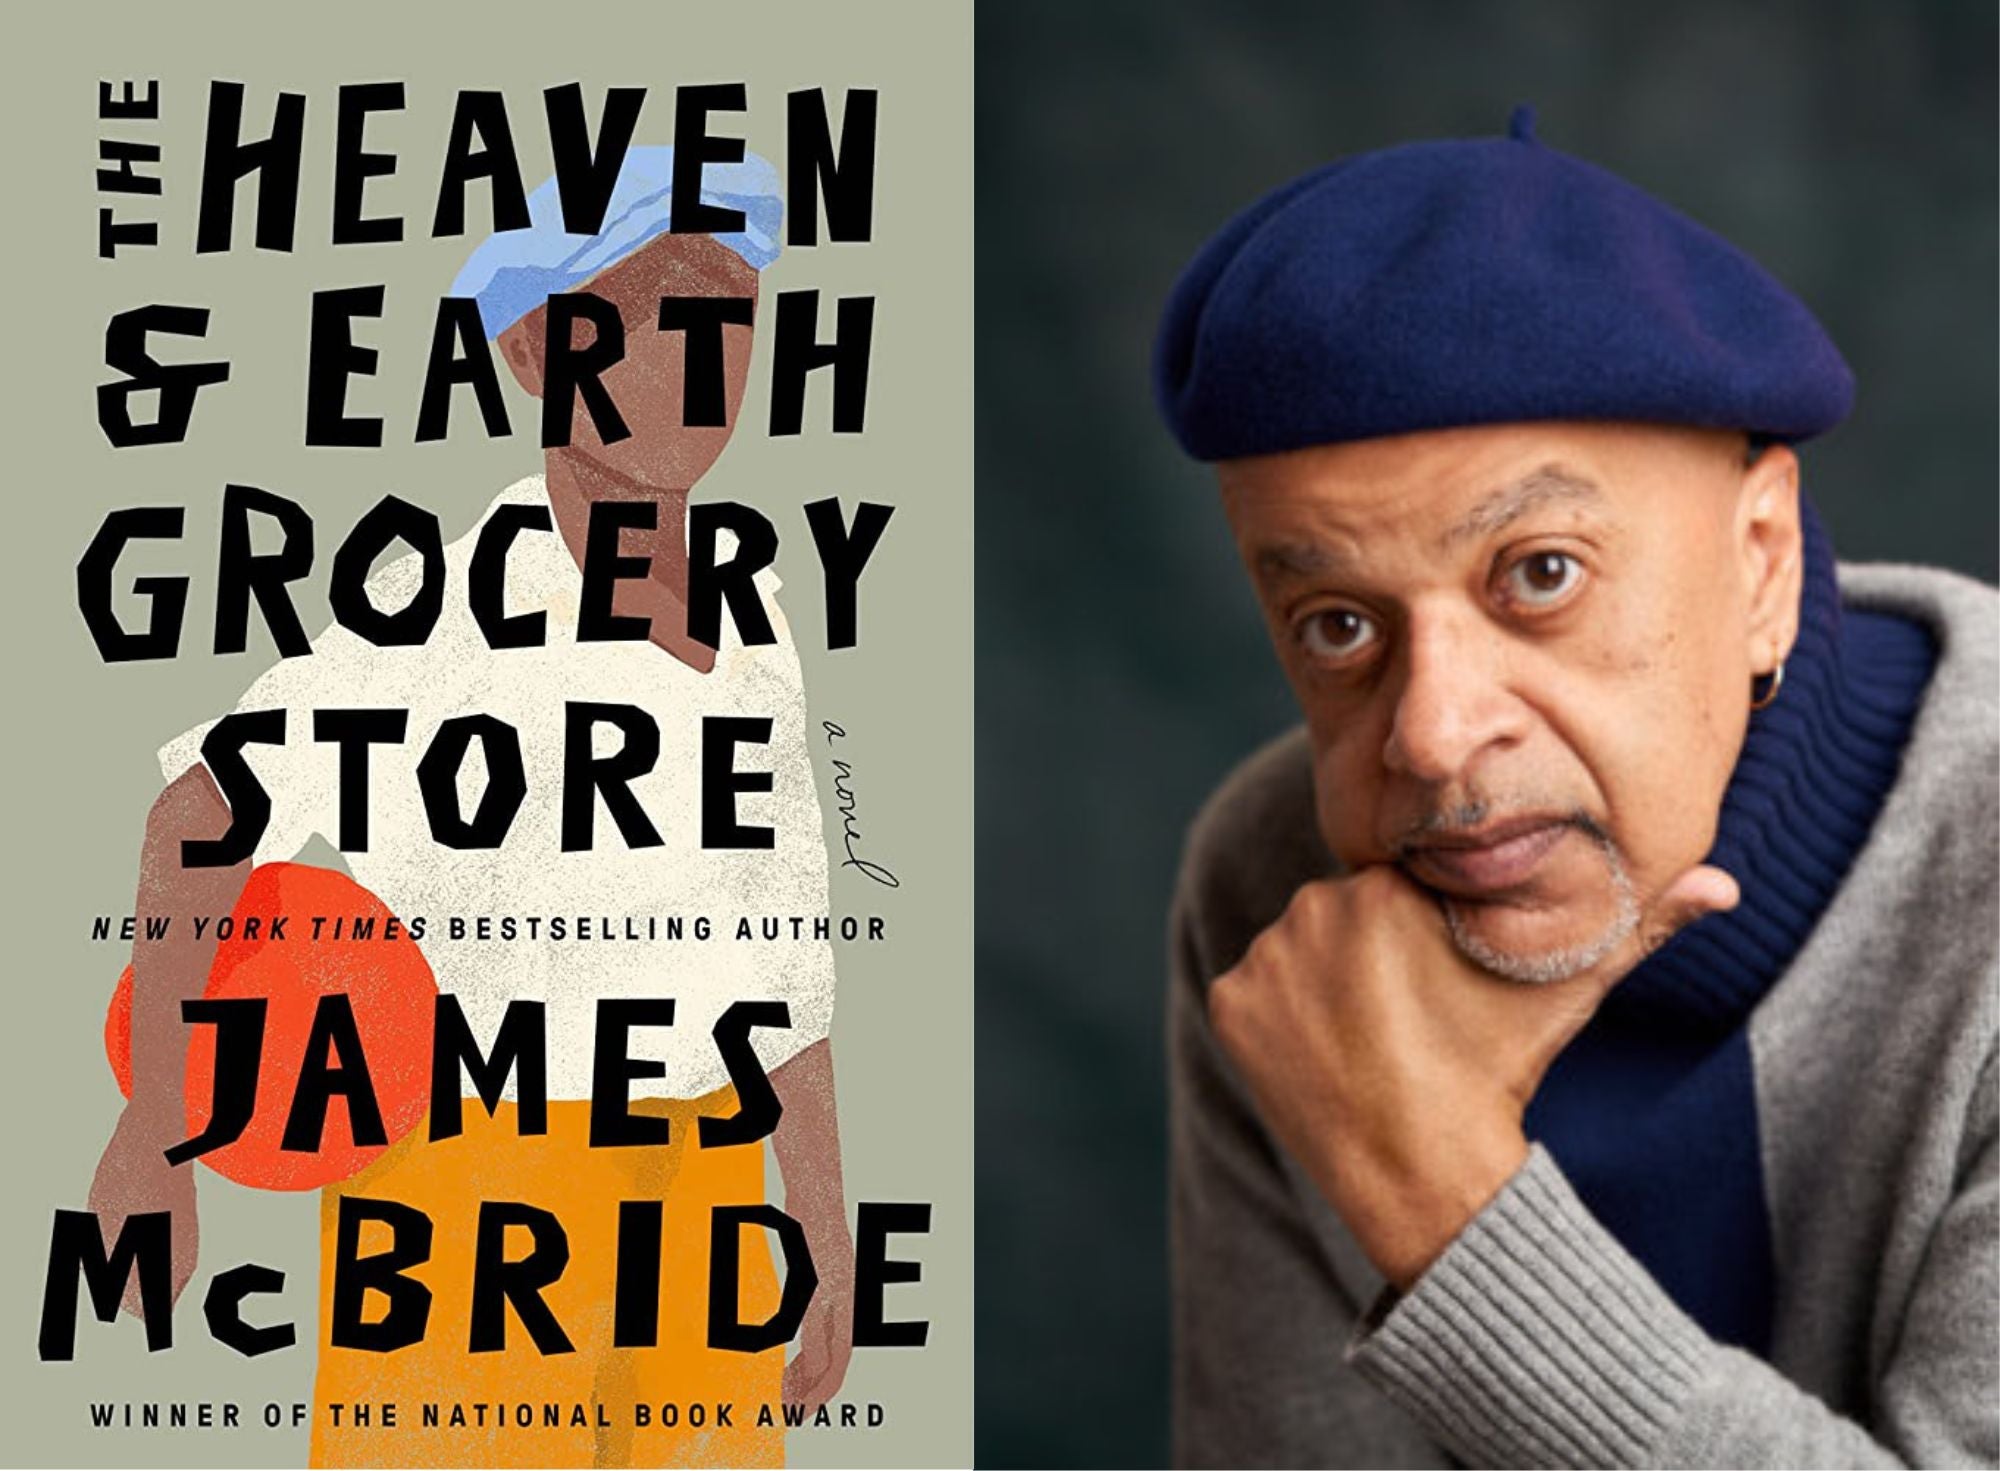 James McBride's 'The Heaven & Earth Grocery Store' WHYY